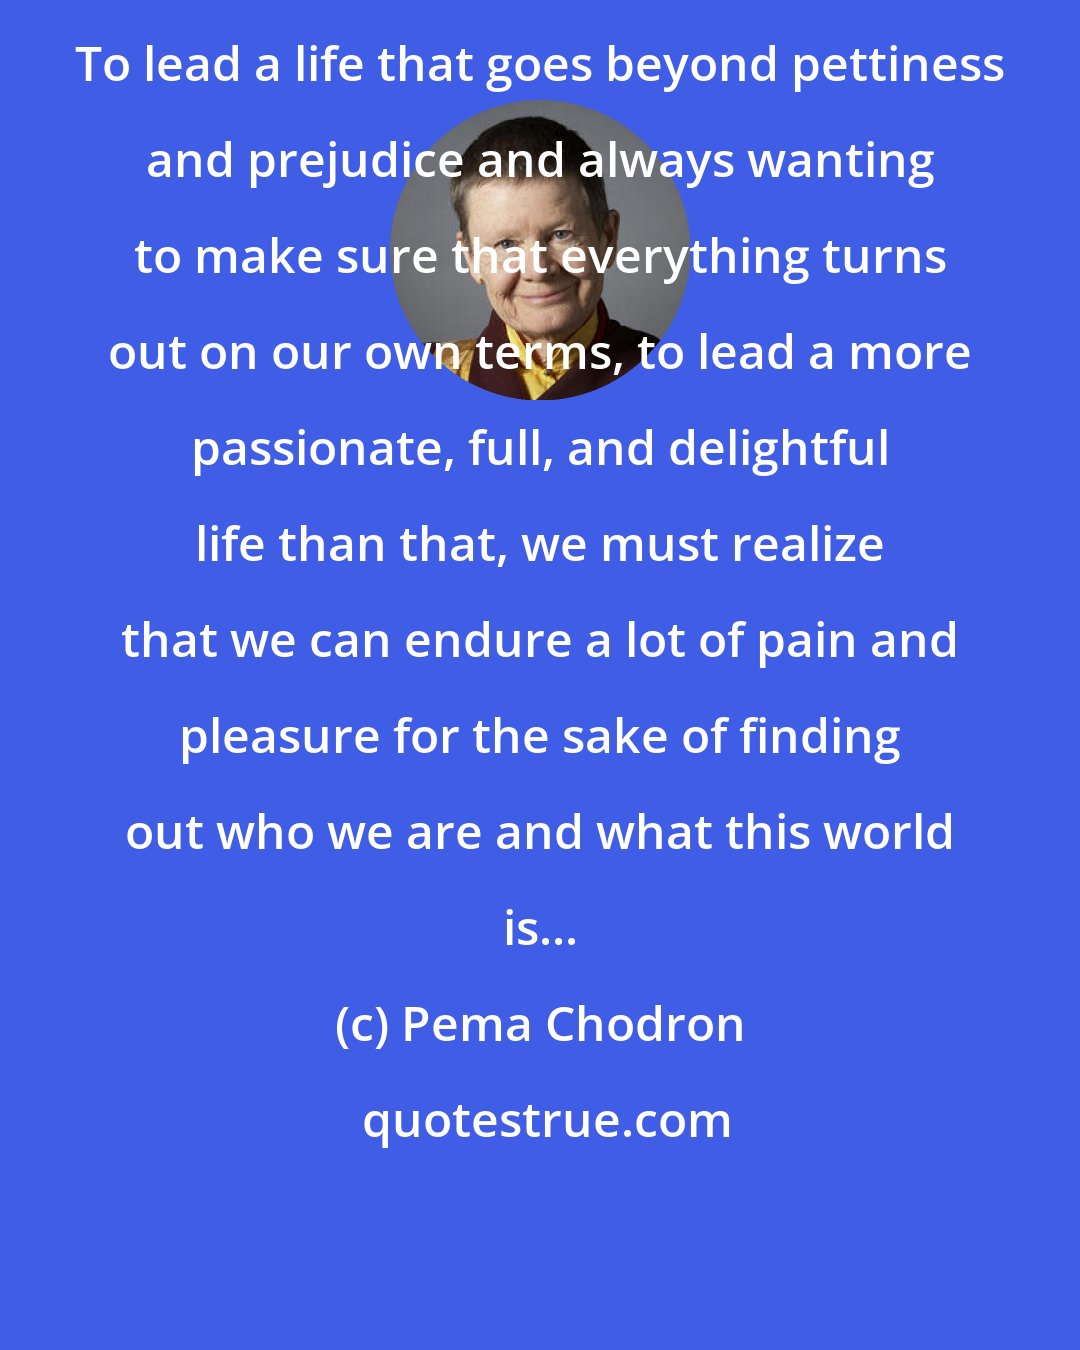 Pema Chodron: To lead a life that goes beyond pettiness and prejudice and always wanting to make sure that everything turns out on our own terms, to lead a more passionate, full, and delightful life than that, we must realize that we can endure a lot of pain and pleasure for the sake of finding out who we are and what this world is...